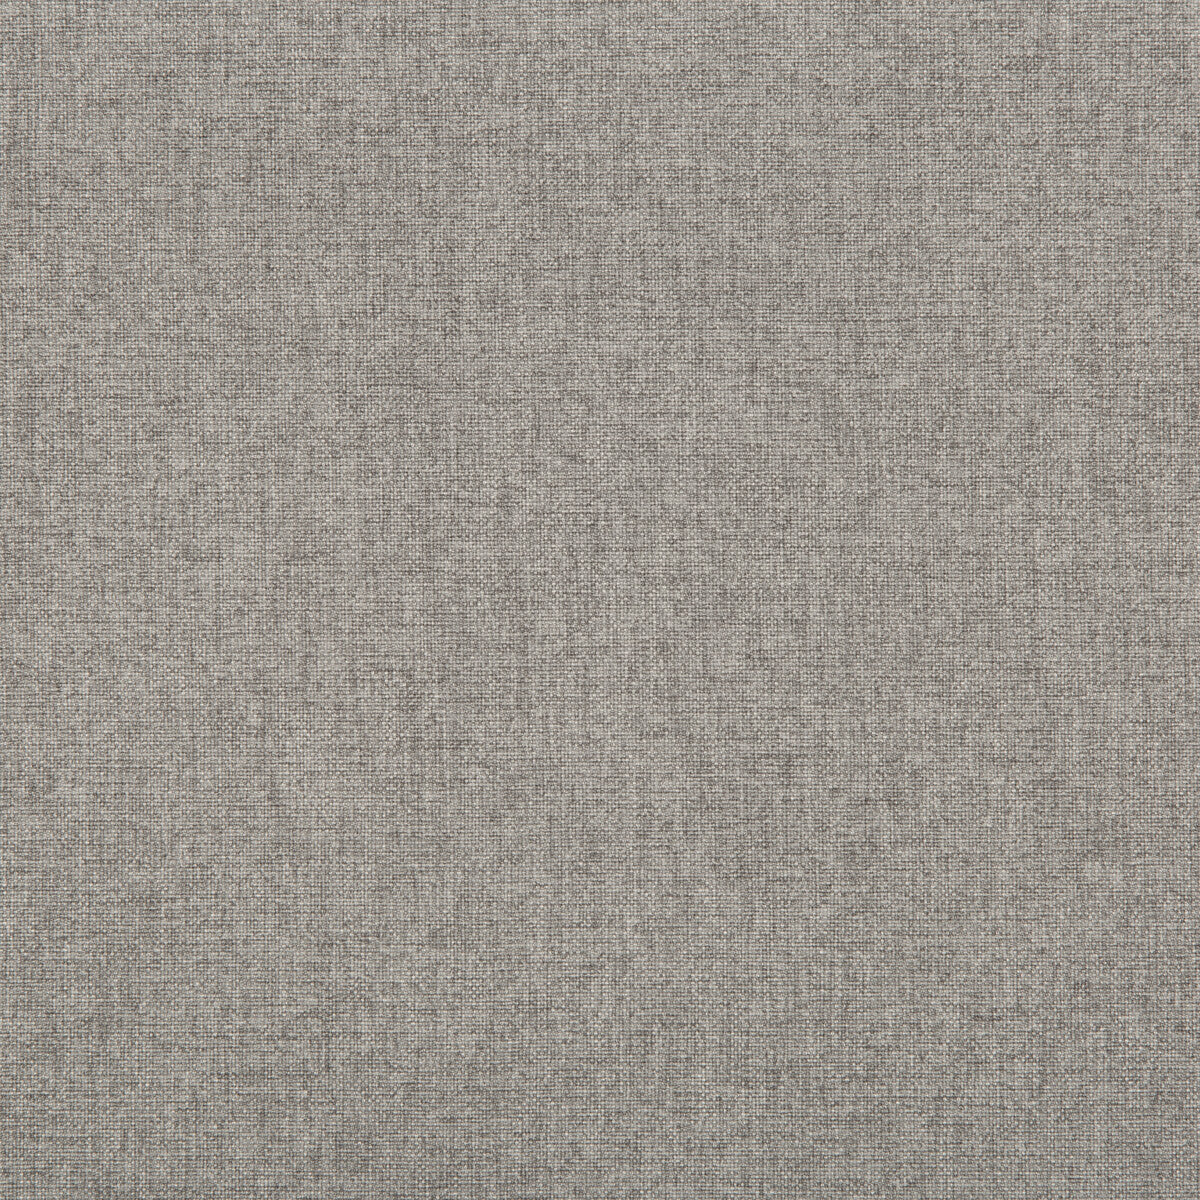 Kravet Contract fabric in 35480-11 color - pattern 35480.11.0 - by Kravet Contract